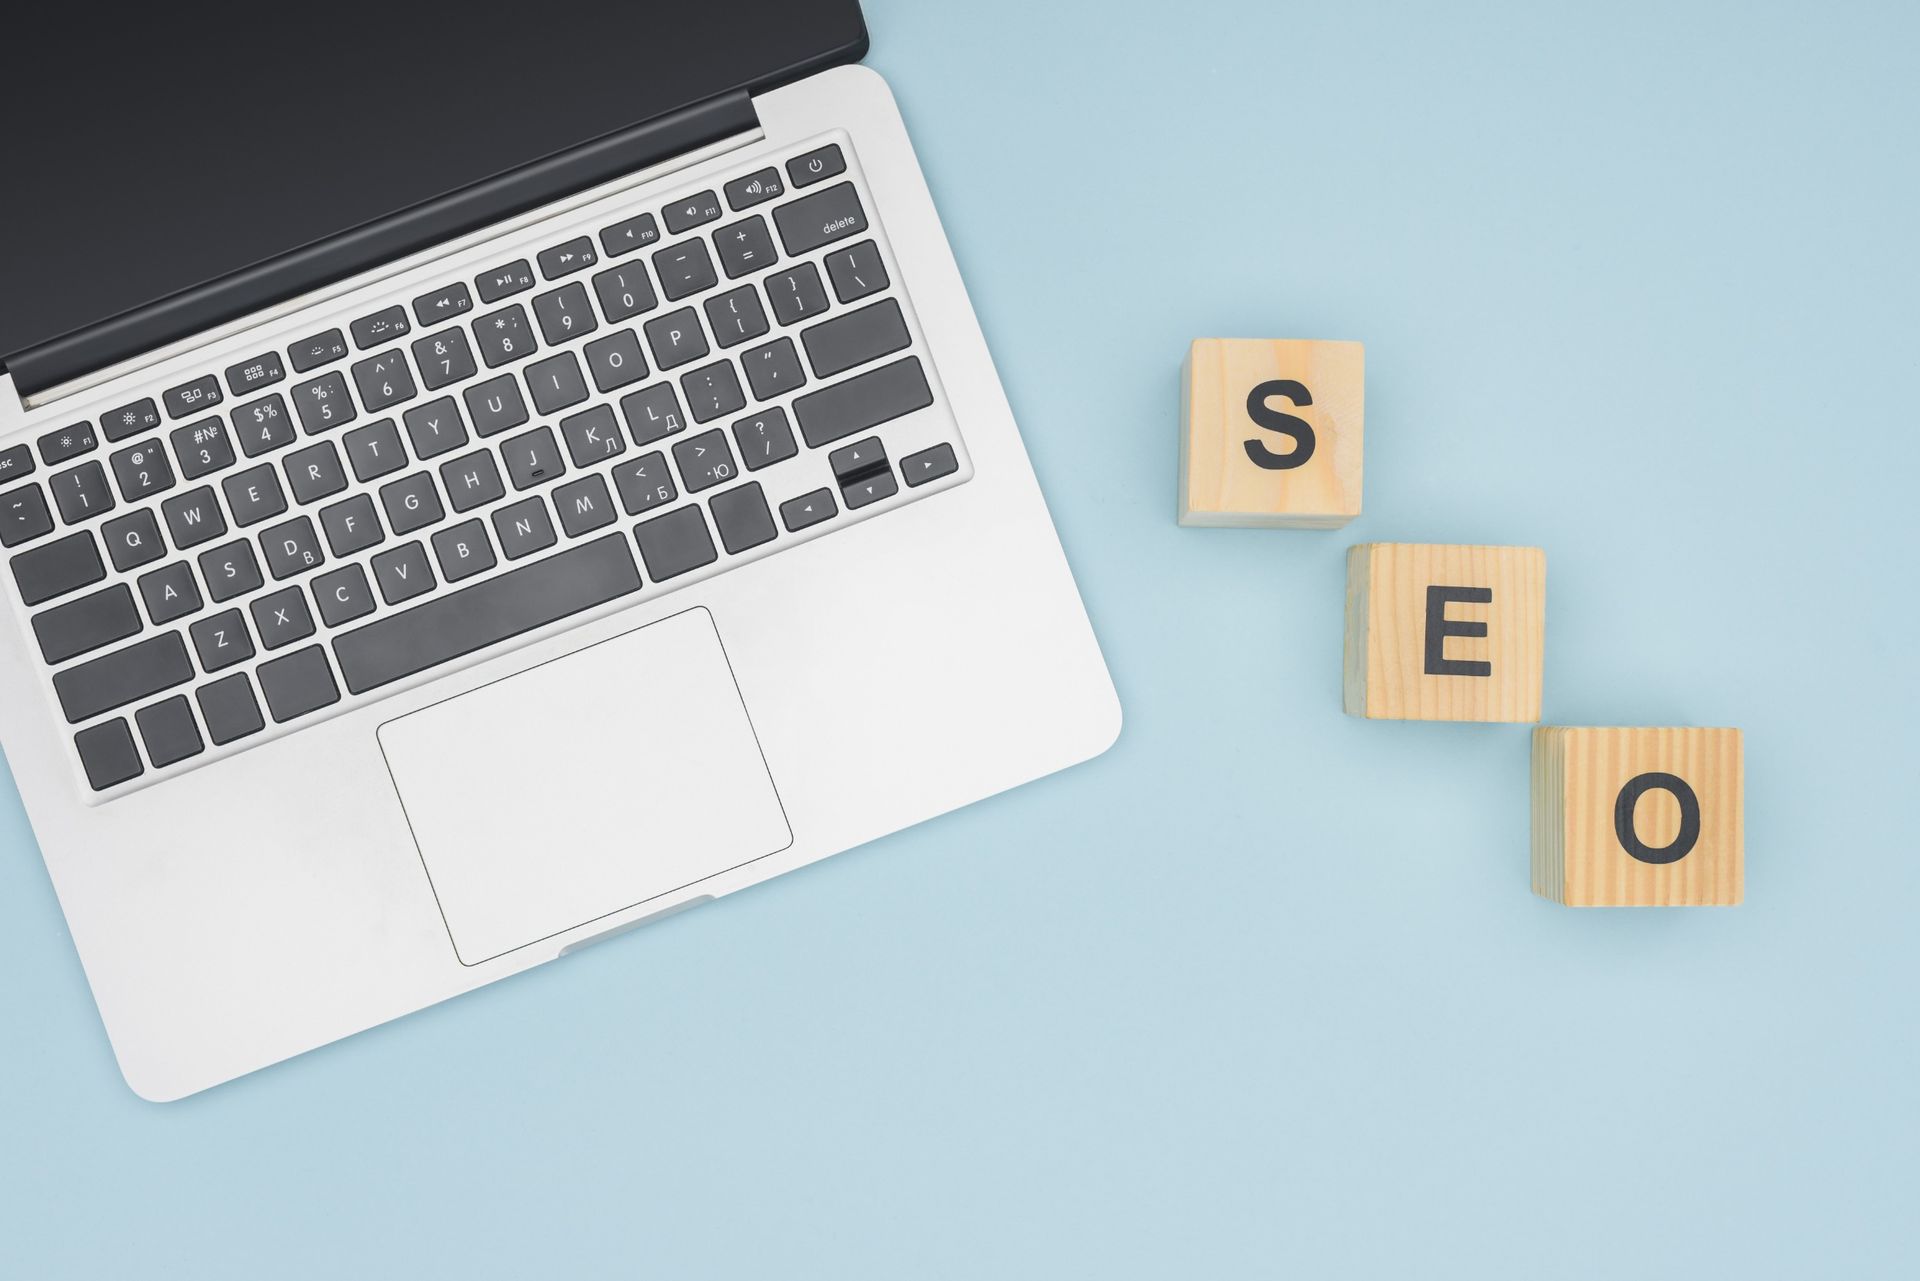 The Importance of SEO for Your Business